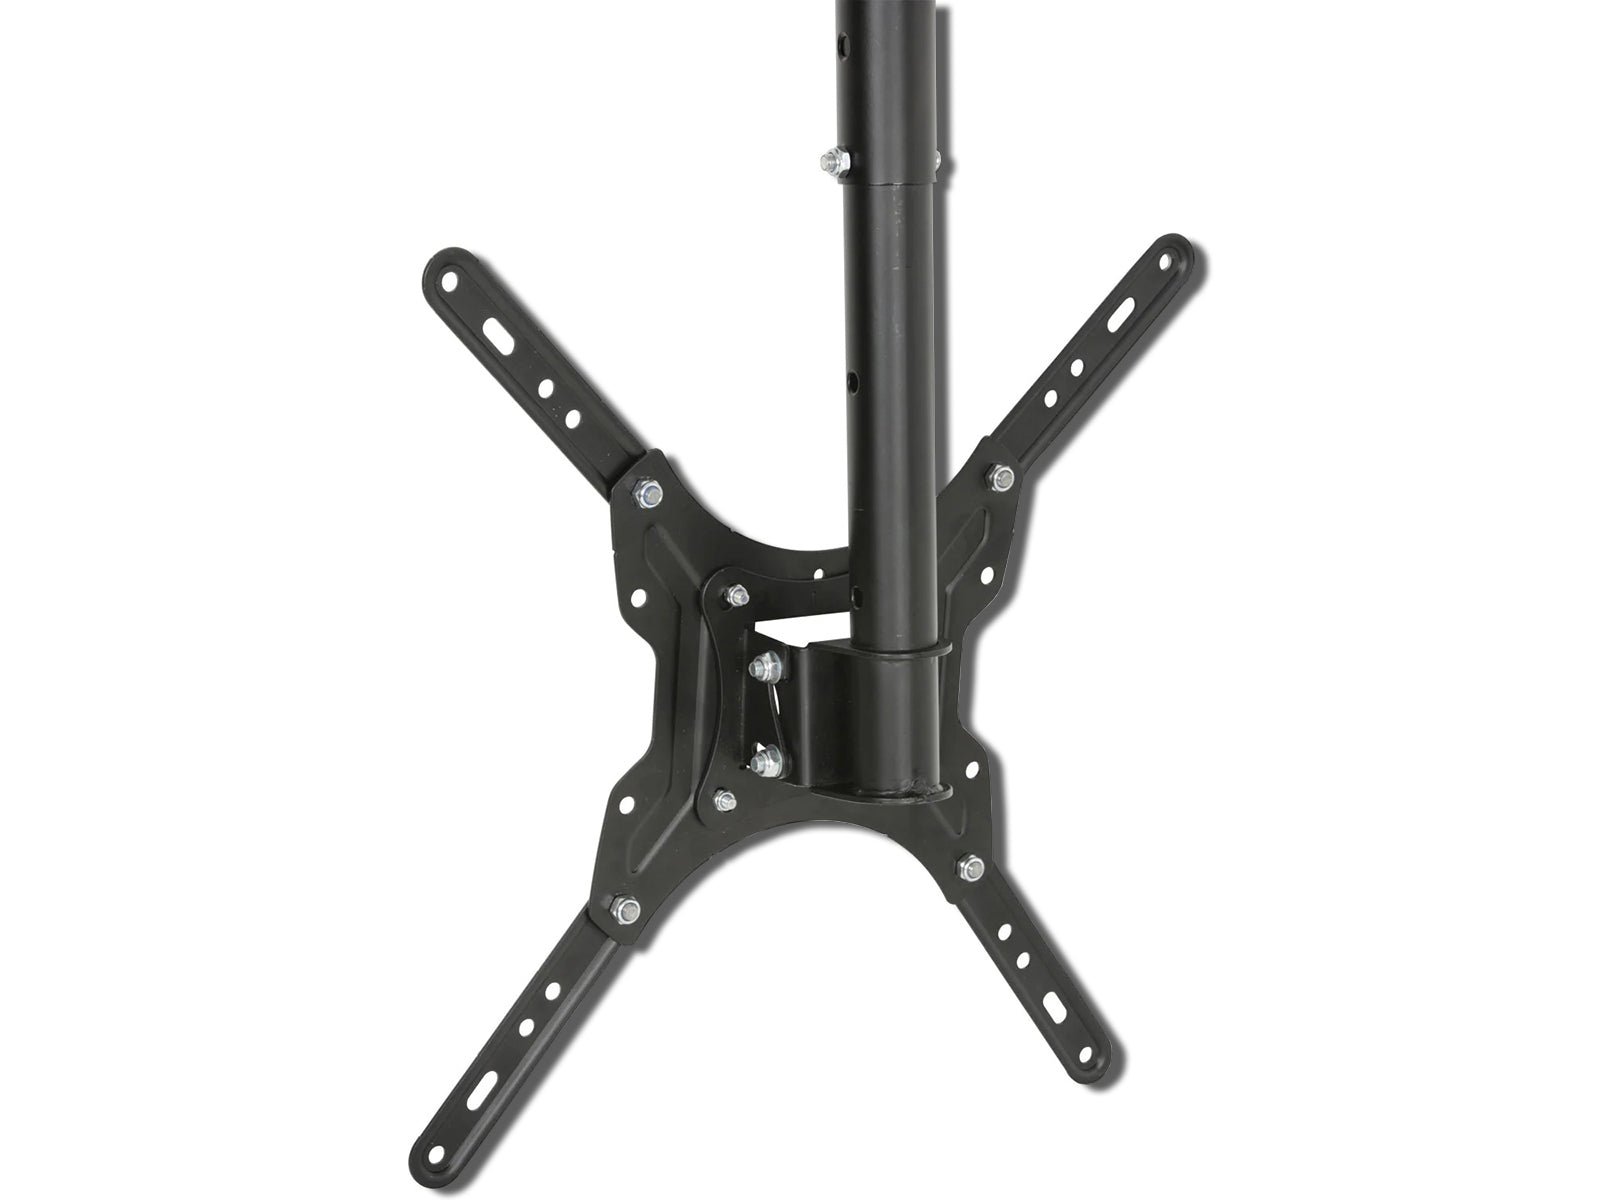 Ceiling Mounted Bracket Mount View